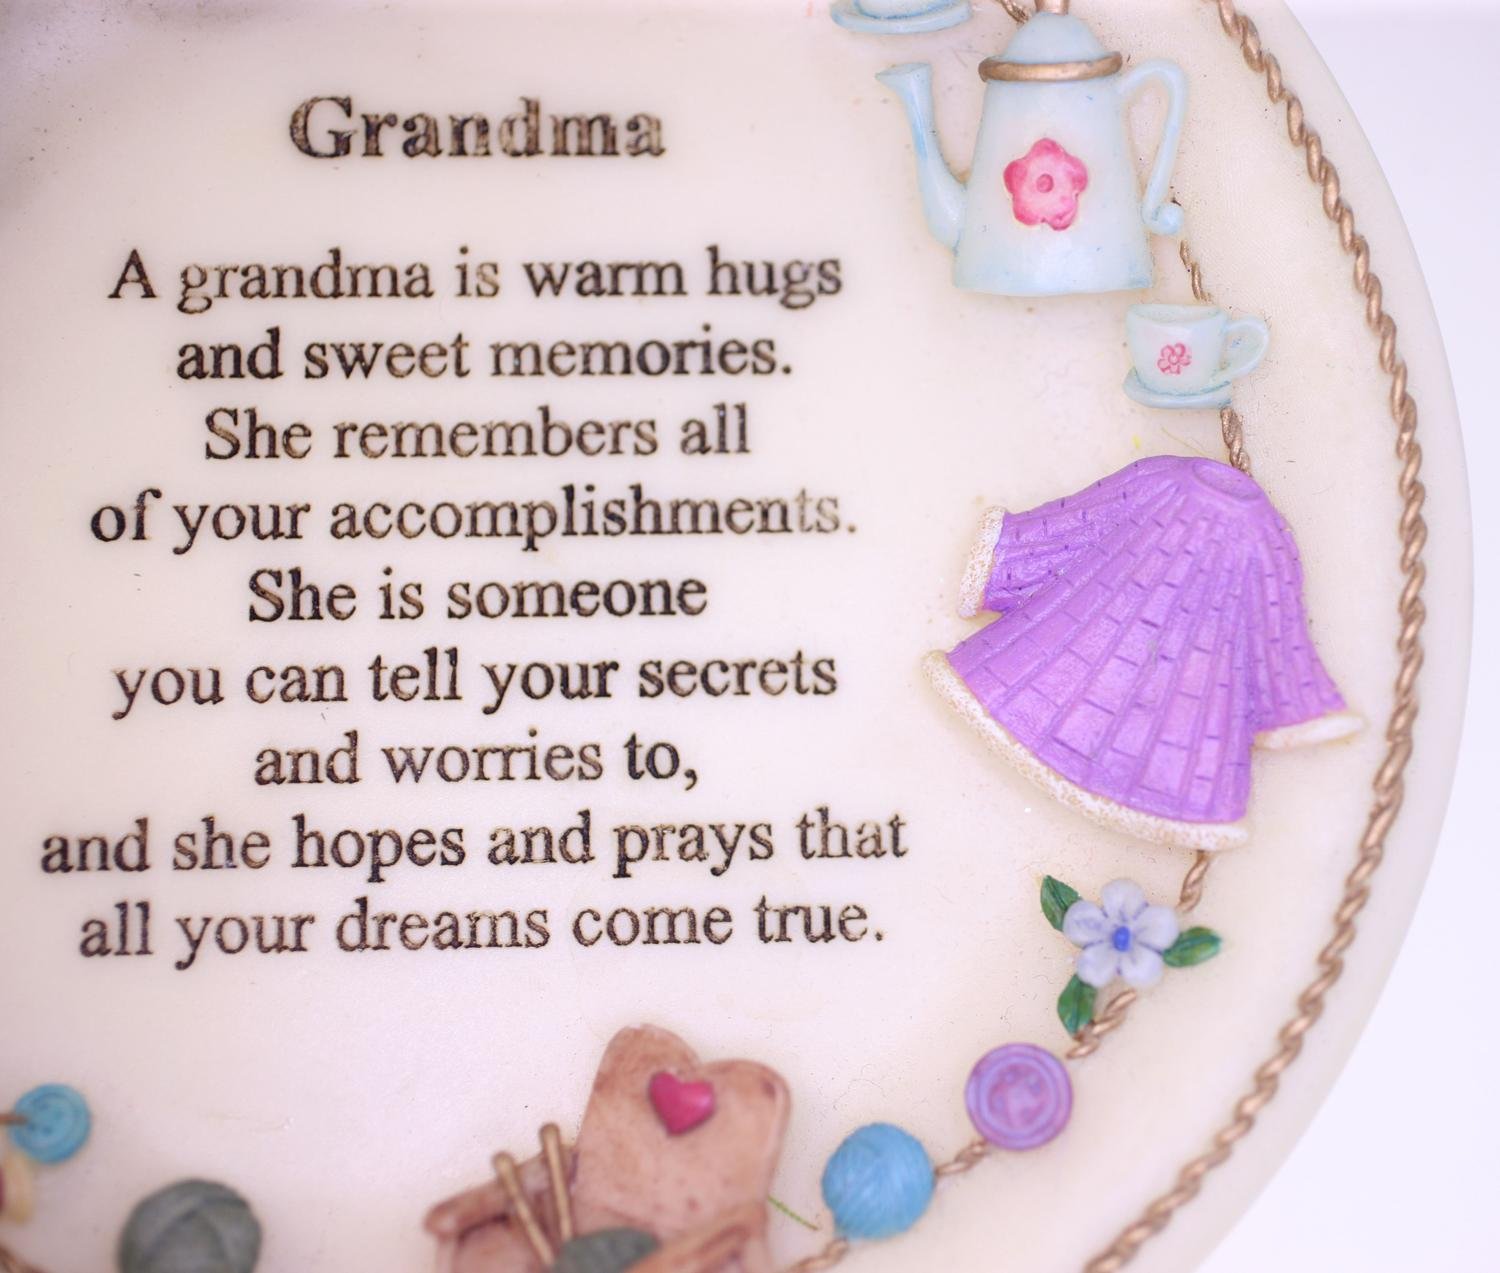 Grandma vintage hanging plate ornament with English text poem (Weight: 230g)